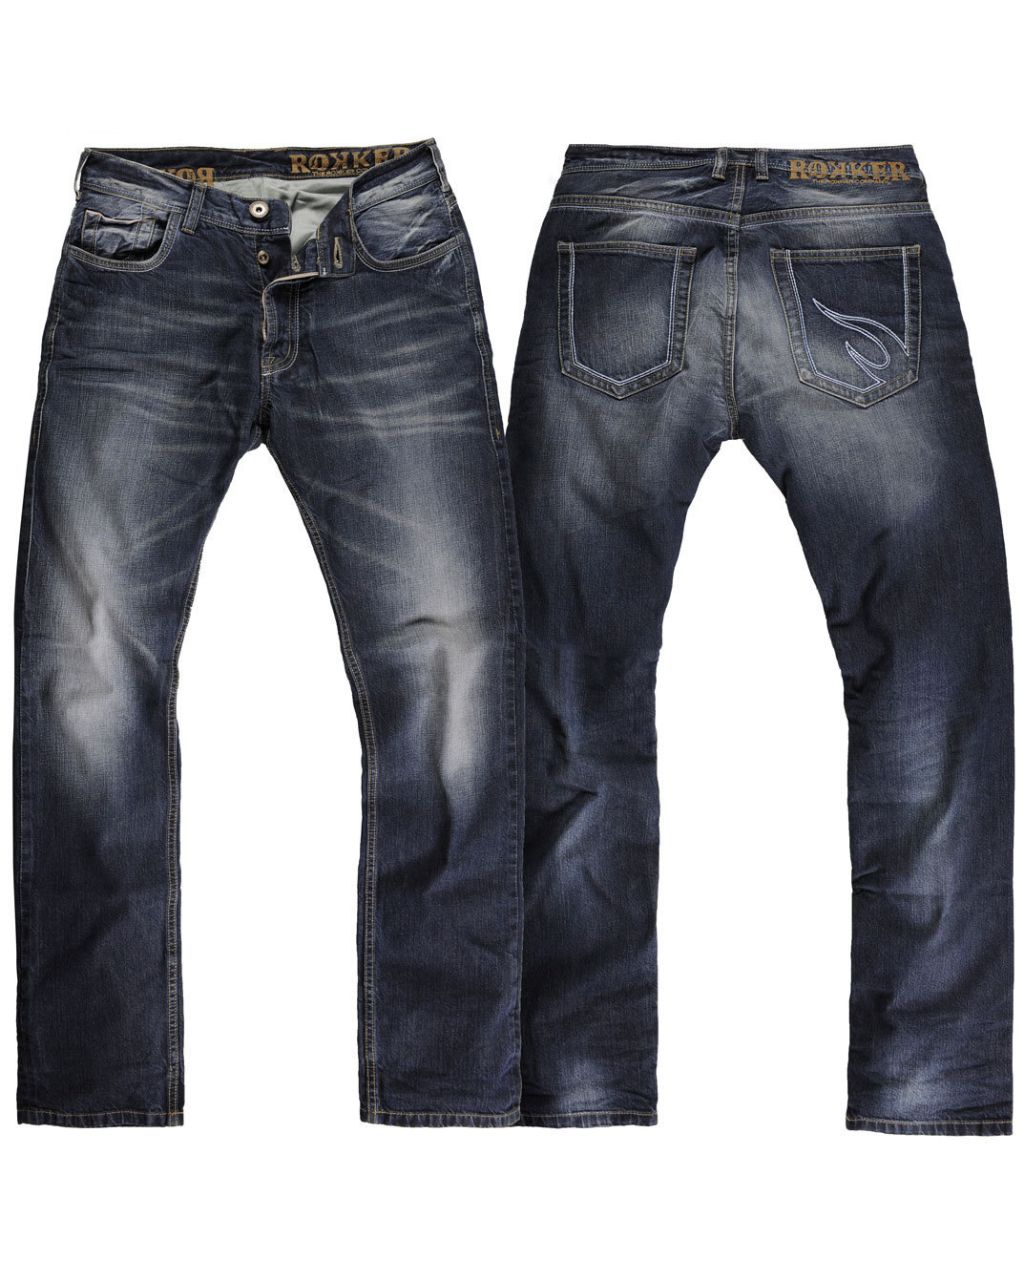 RED SELVAGE 1022 slim fit